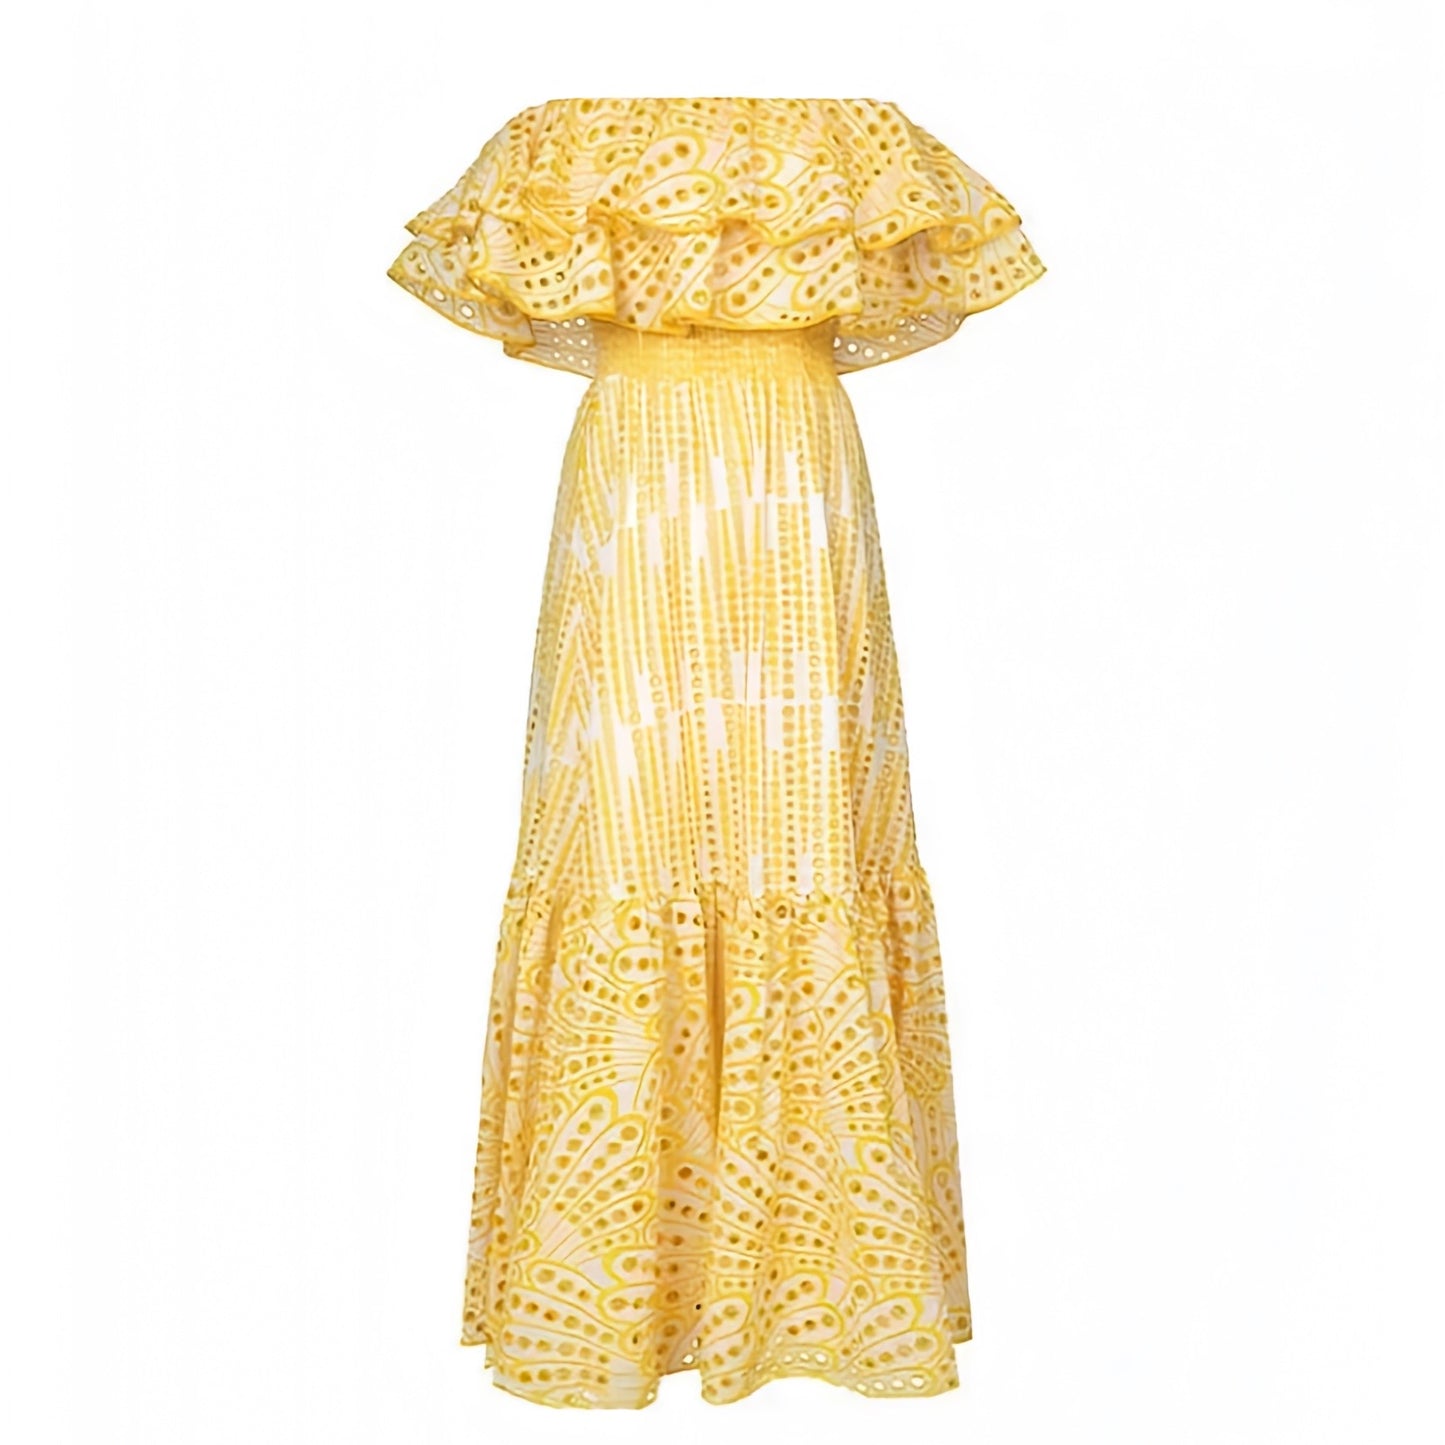 yellow-and-white-eyelet-embroidered-floral-patterned-striped-layered-ruffle-bodycon-drop-waist-smocked-off-shoulder-short-sleeve-bandeau-strapless-flowy-midi-long-maxi-dress-ball-gown-women-ladies-chic-trendy-spring-2024-summer-elegant-semi-formal-feminine-casual-preppy-style-prom-couture-european-beach-tropical-vacation-sundress-charo-ruiz-ibiza-revolve-zimmerman-dupe